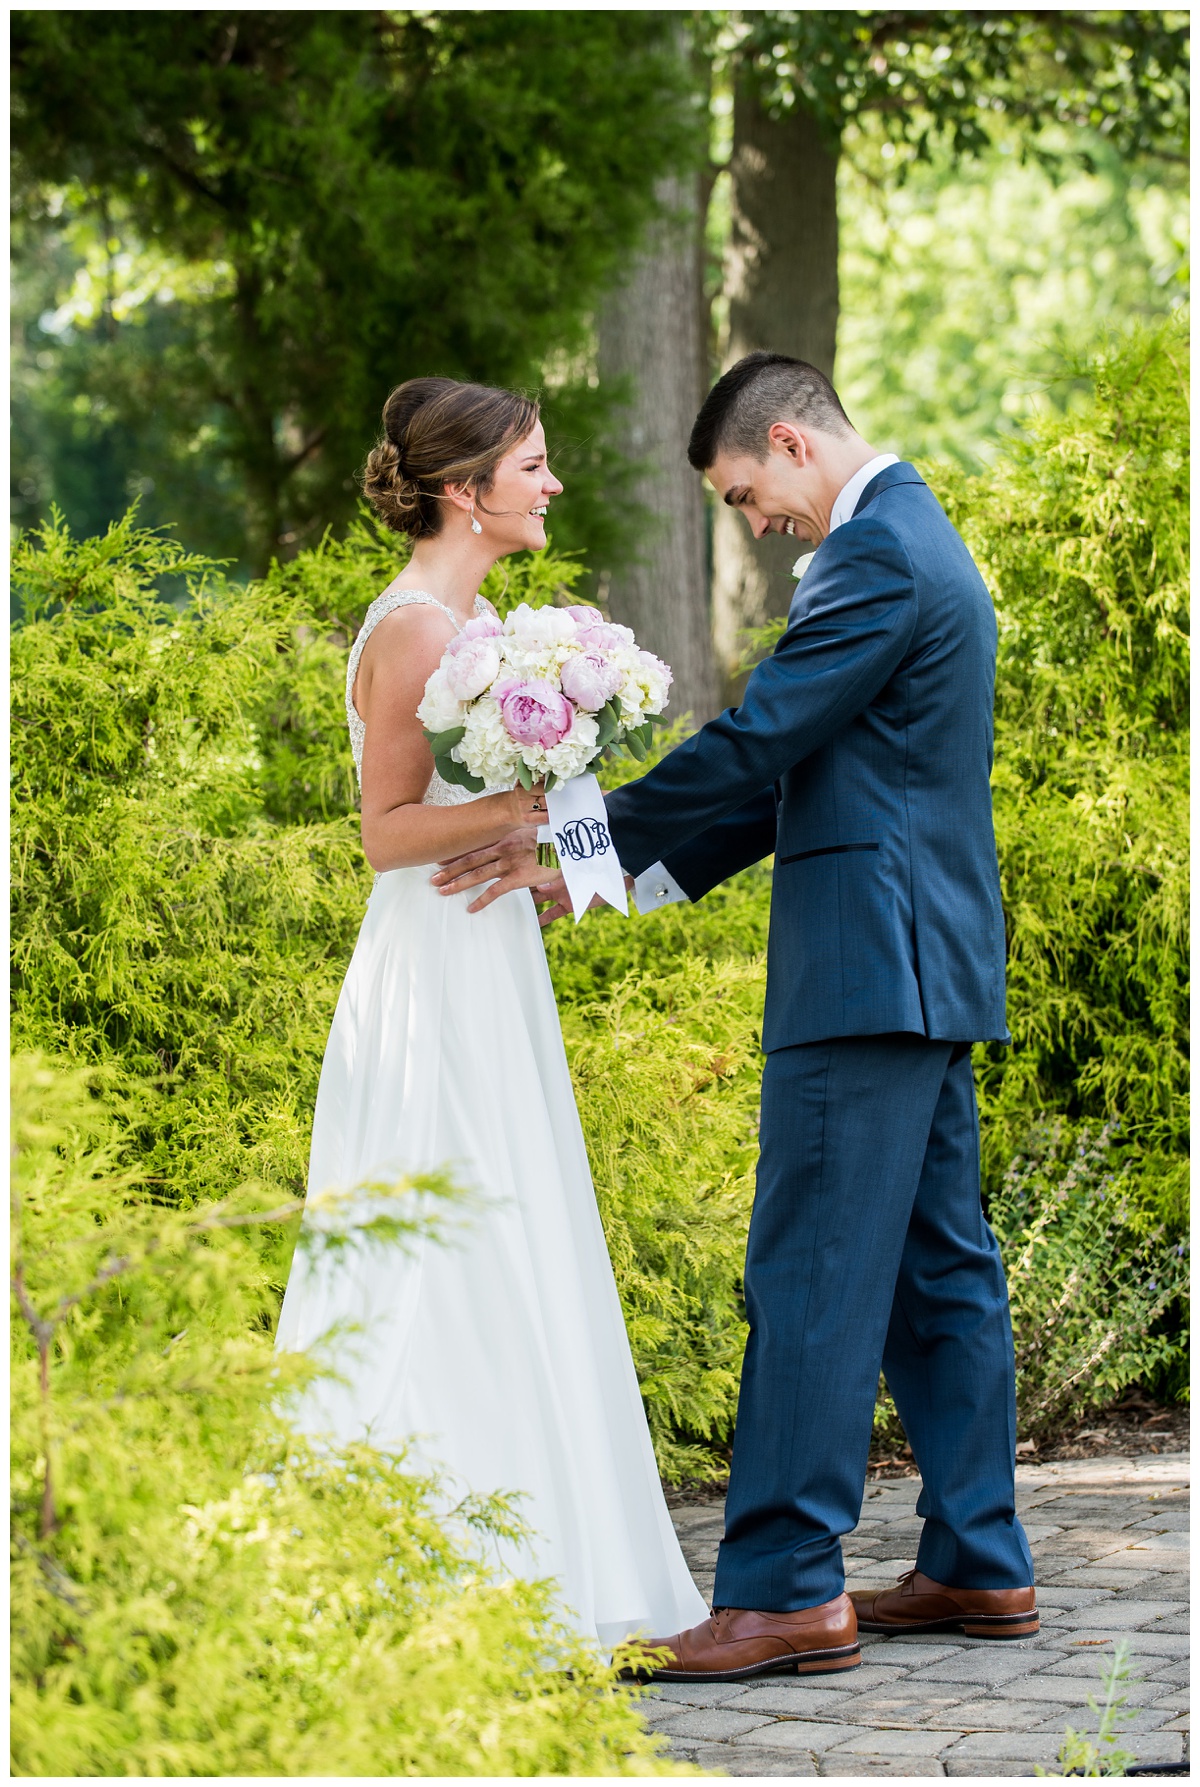 charming countryside wedding at the oaks waterfront inn - royal oak maryland venue - first look photo outdoors - smiling couple - chesapeake bay wedding - easton - st. michaels area wedding ideas in the summer